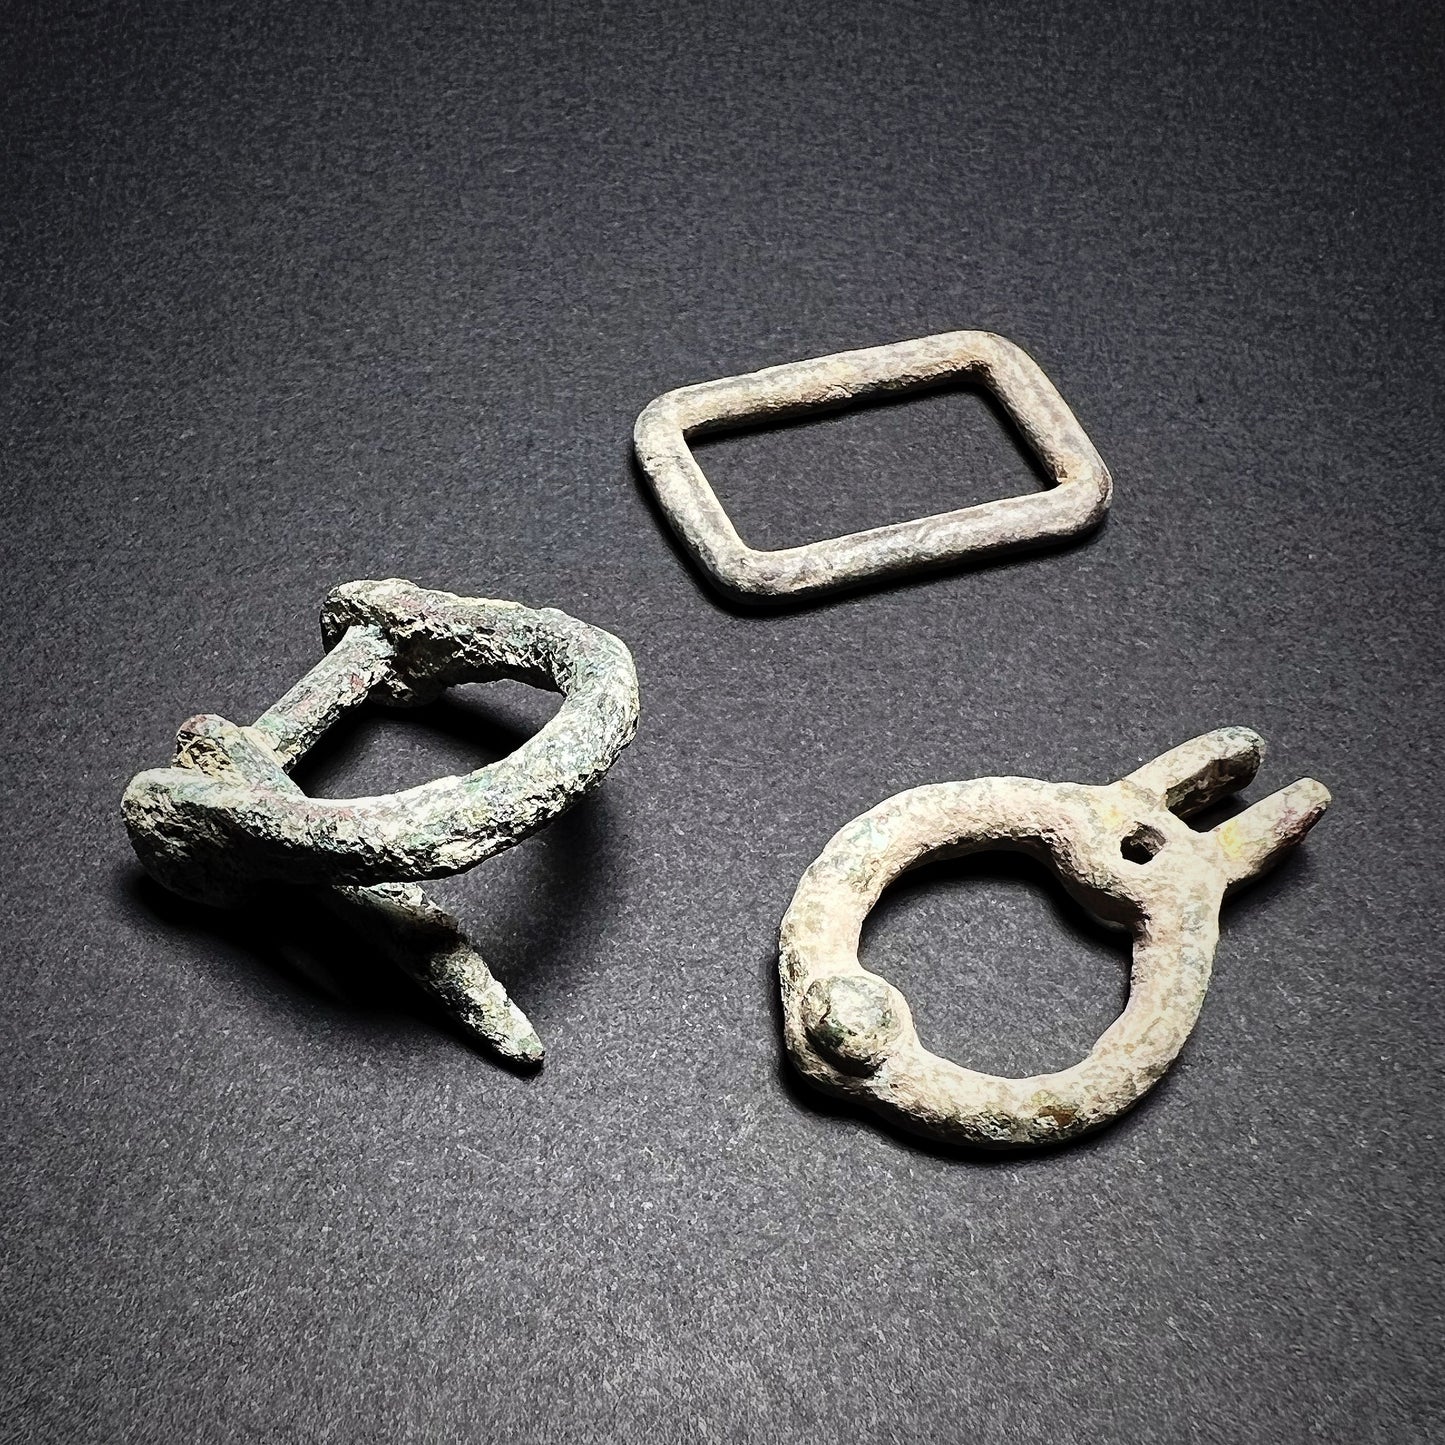 Viking Age or Medieval Bronze Clothing Buckles